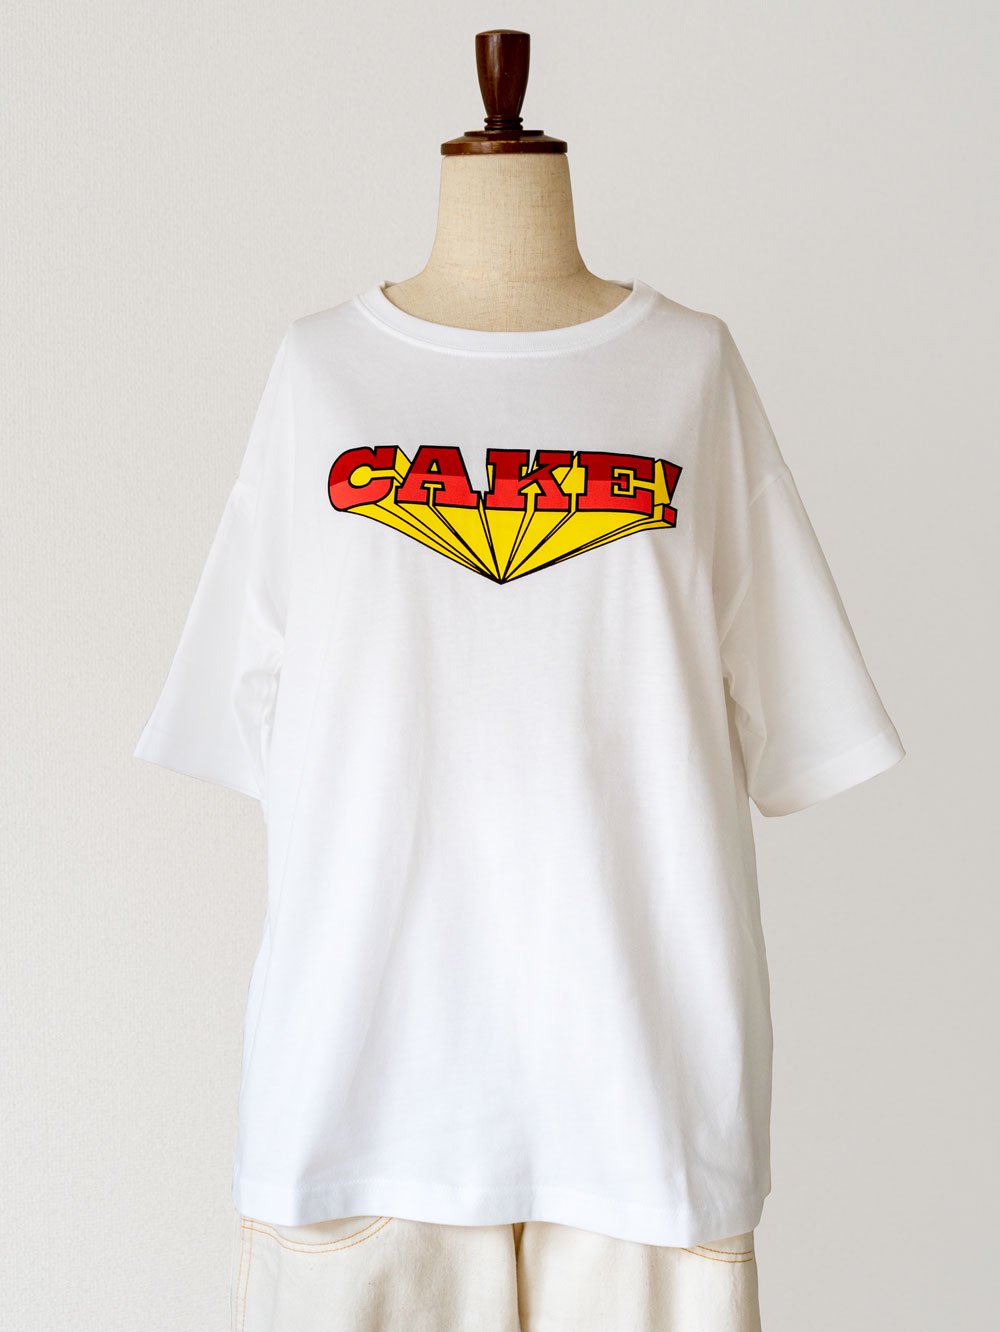 <img class='new_mark_img1' src='https://img.shop-pro.jp/img/new/icons21.gif' style='border:none;display:inline;margin:0px;padding:0px;width:auto;' />T-Shirt「CAKE!」